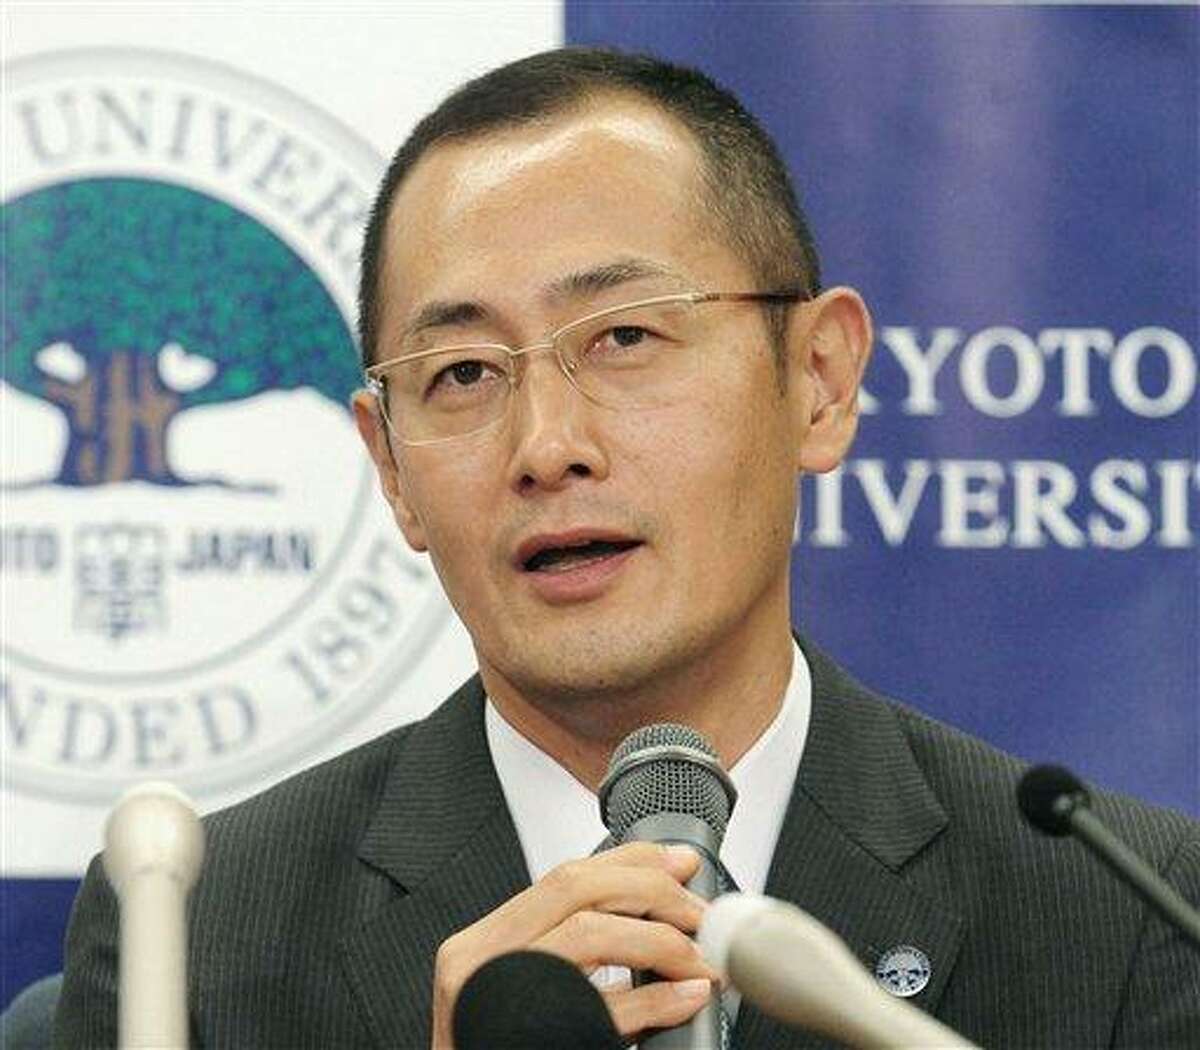 Kyoto University Professor Shinya Yamanaka speaks Monday during a news conference at Kyoto University in Kyoto, western Japan, after learning that he and British researcher John Gurdon won this year's Nobel Prize in medicine. Associated Press/Kyodo News